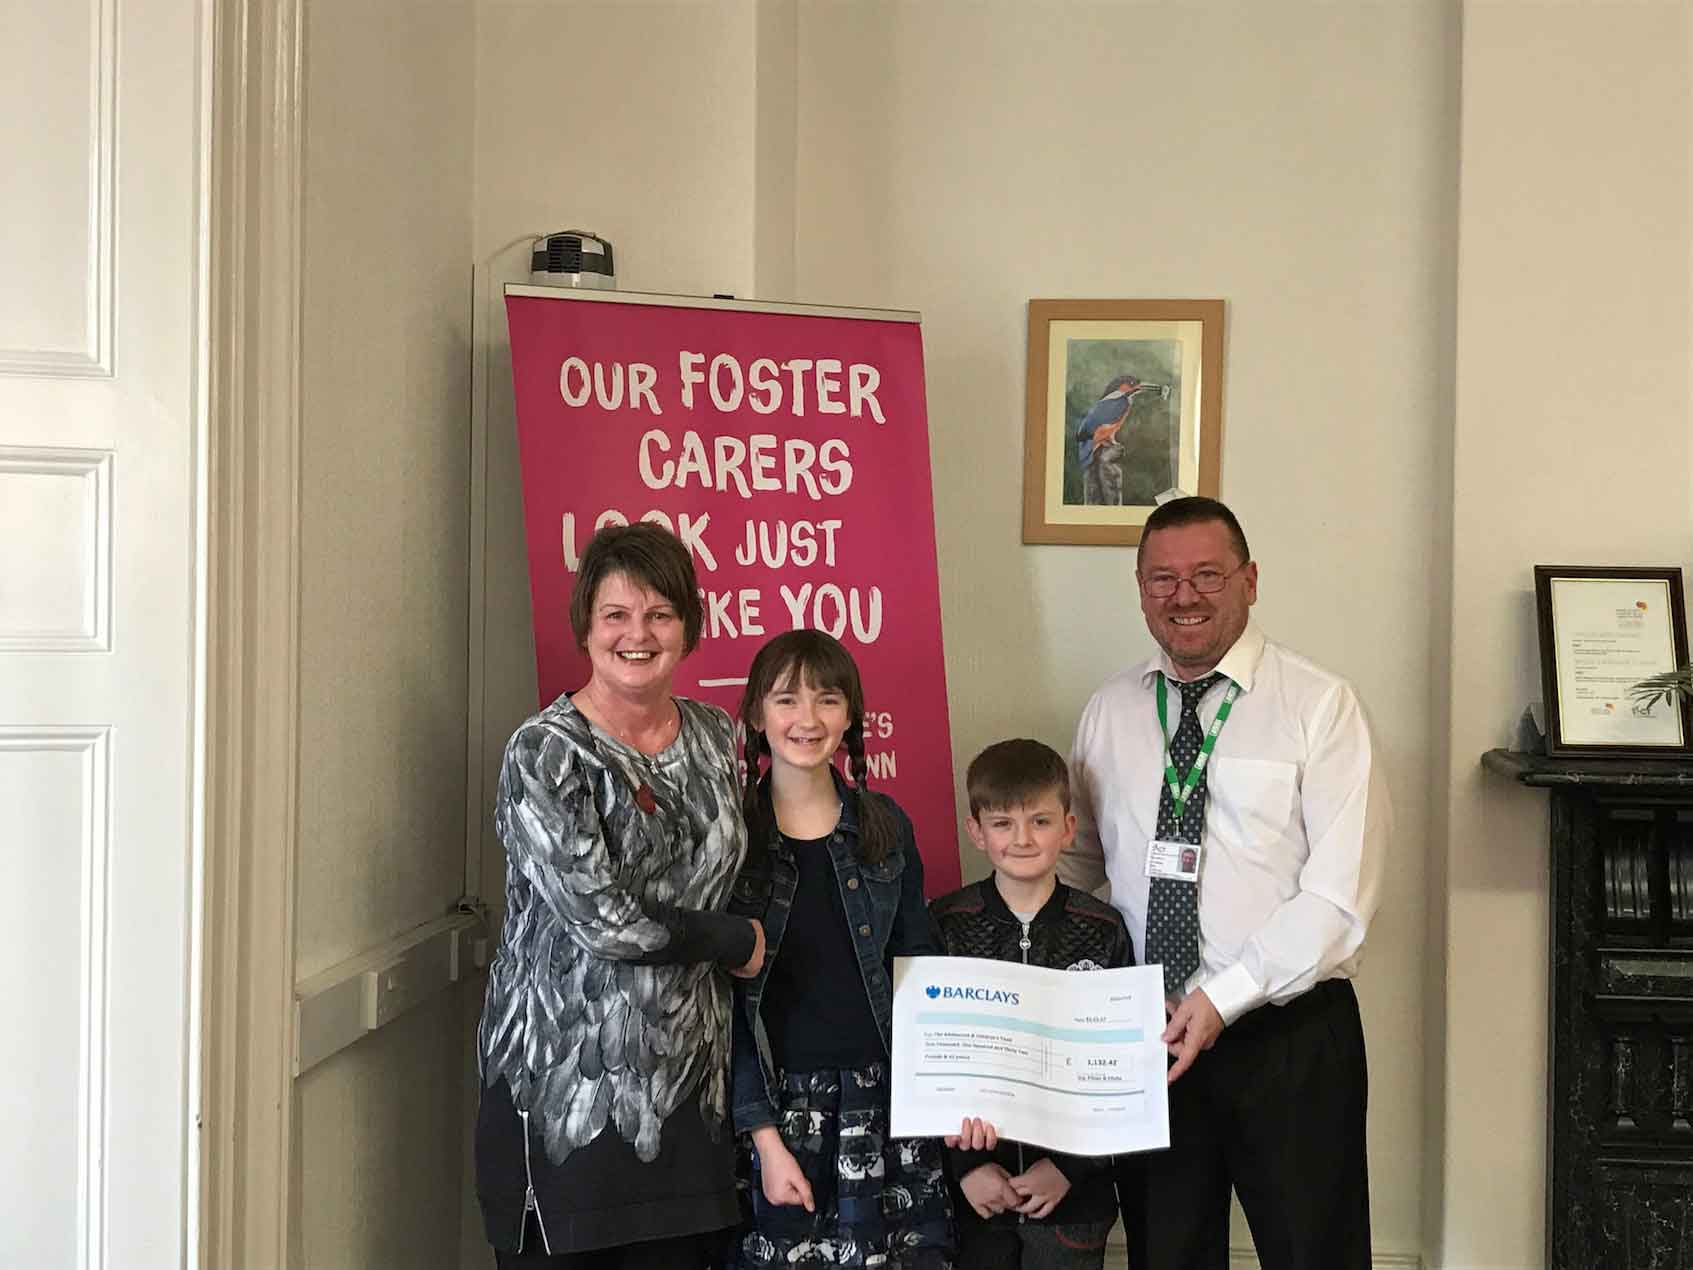 Fostered siblings from Aberdare raised £1132.42 by climbing Snowdon